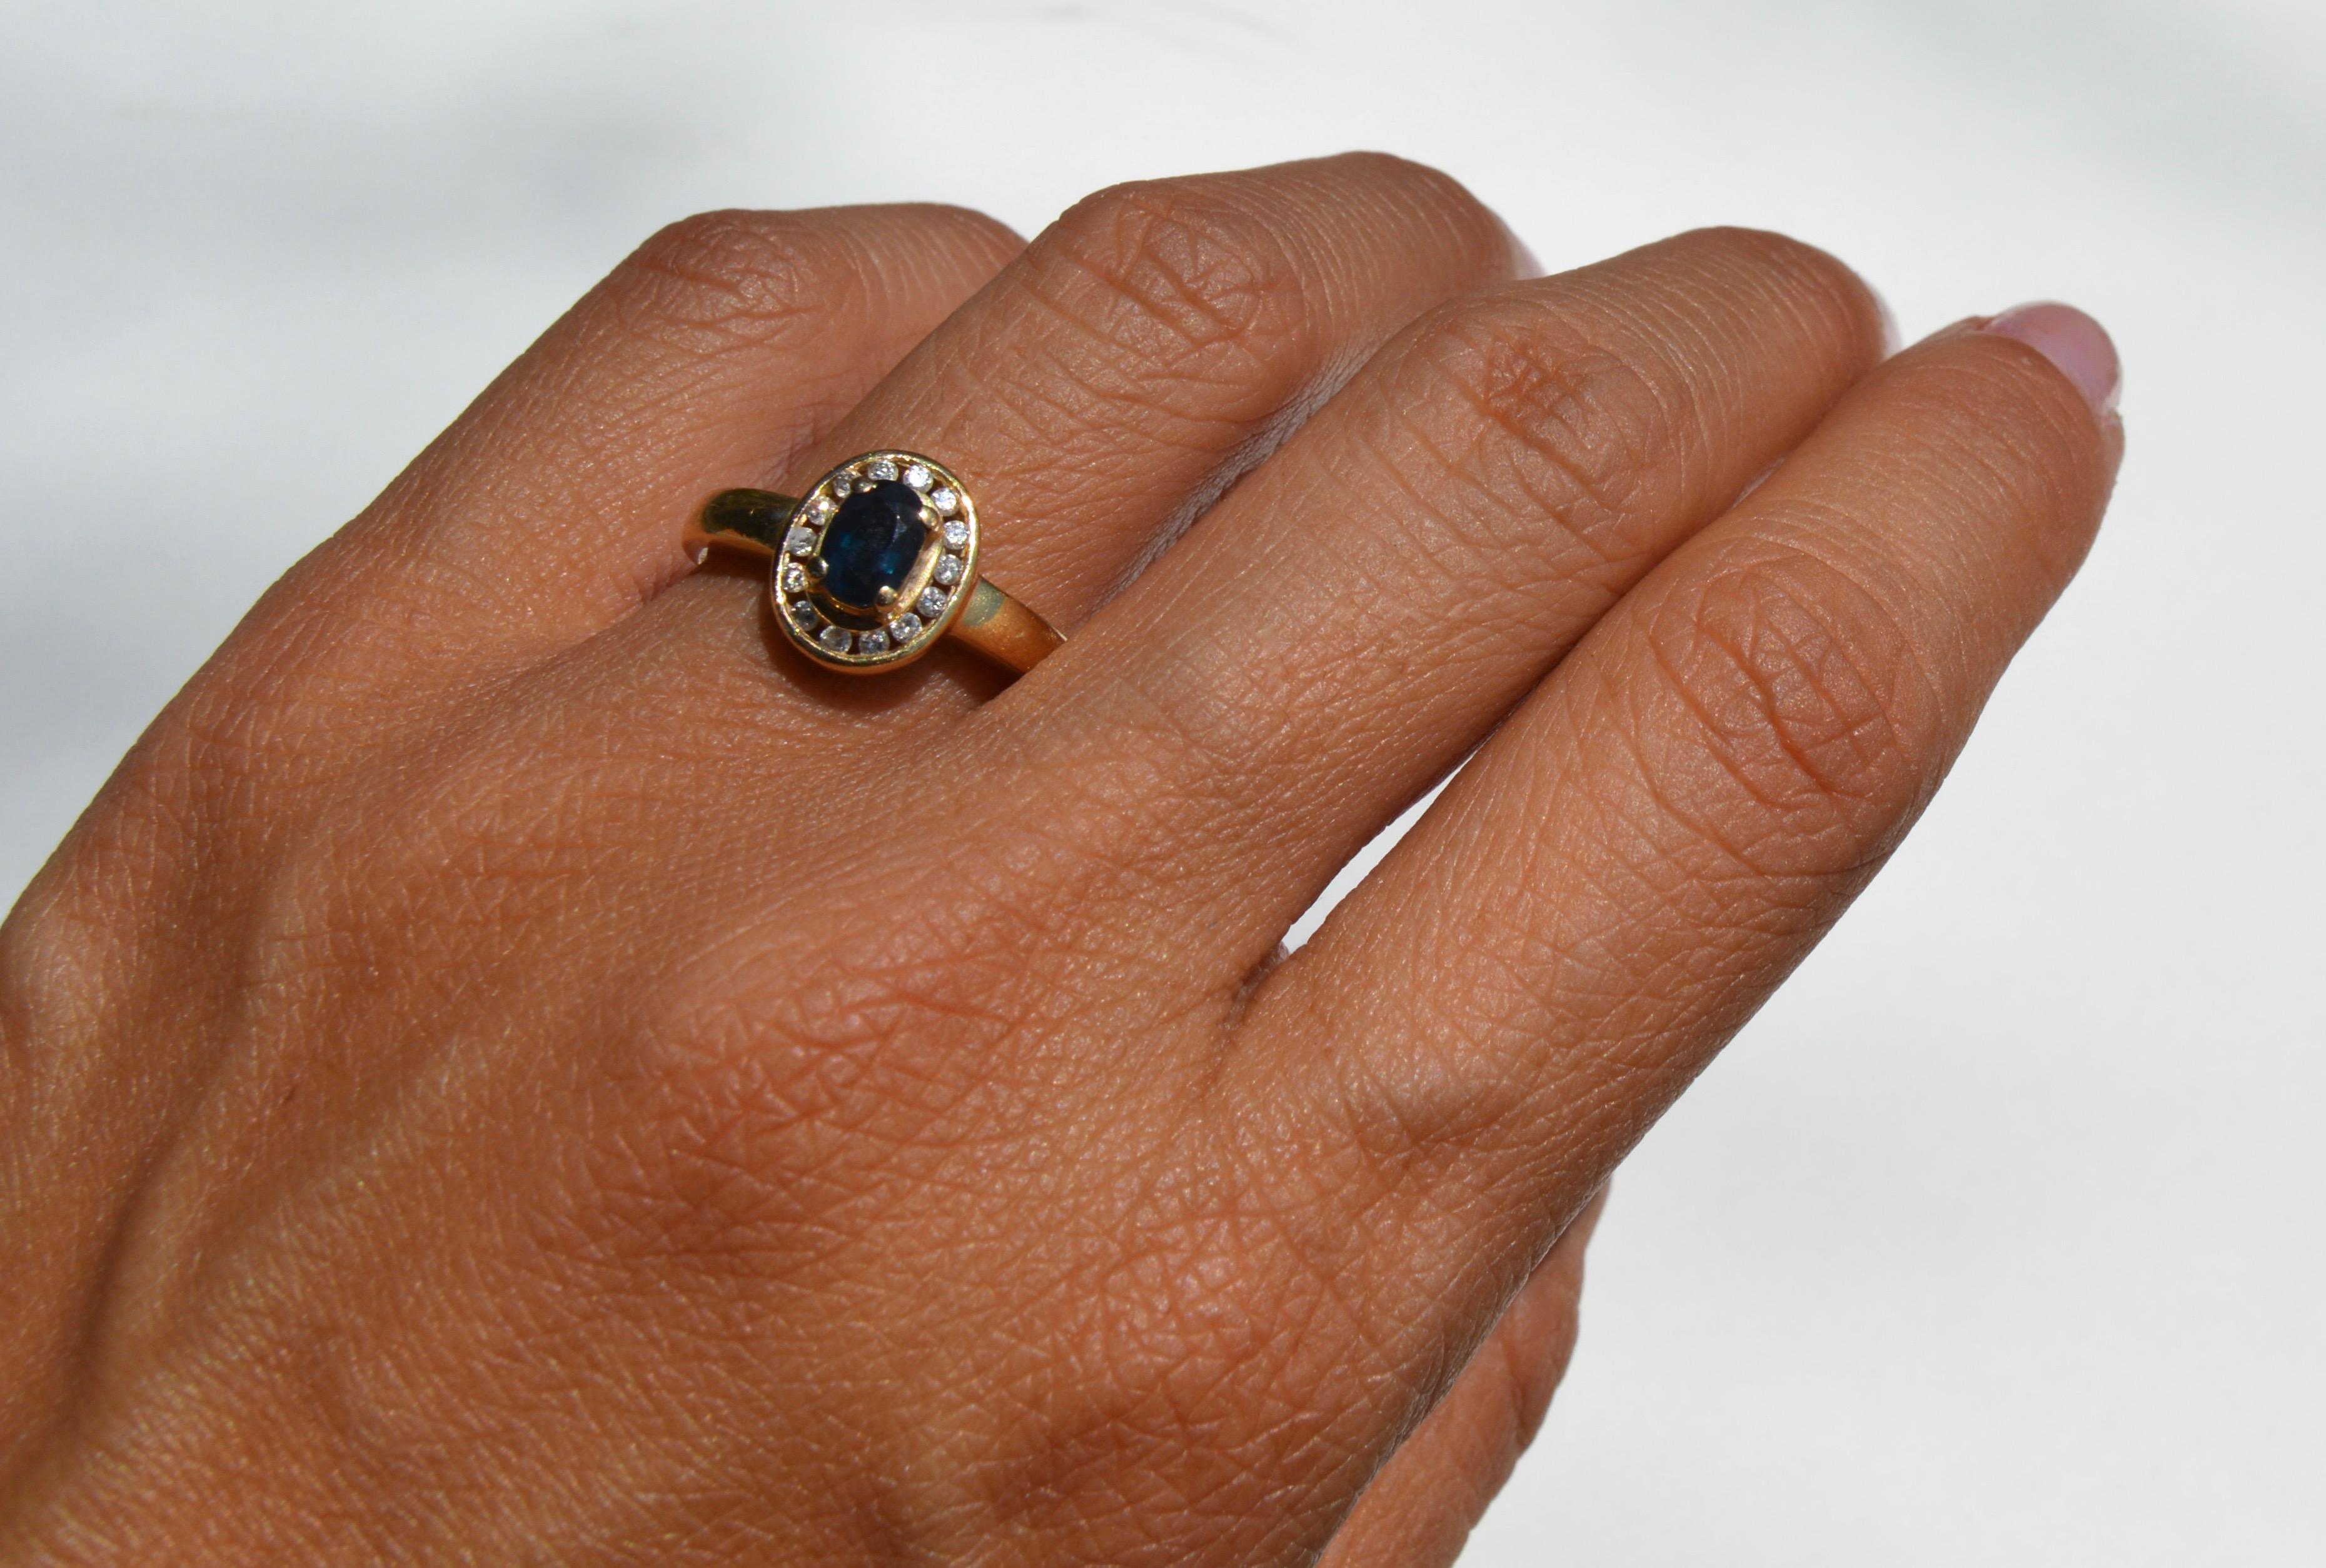 Vintage Midcentury .35 Carat Sapphire Diamond Halo 14 Karat Gold Engagement Ring In Good Condition For Sale In Crownsville, MD